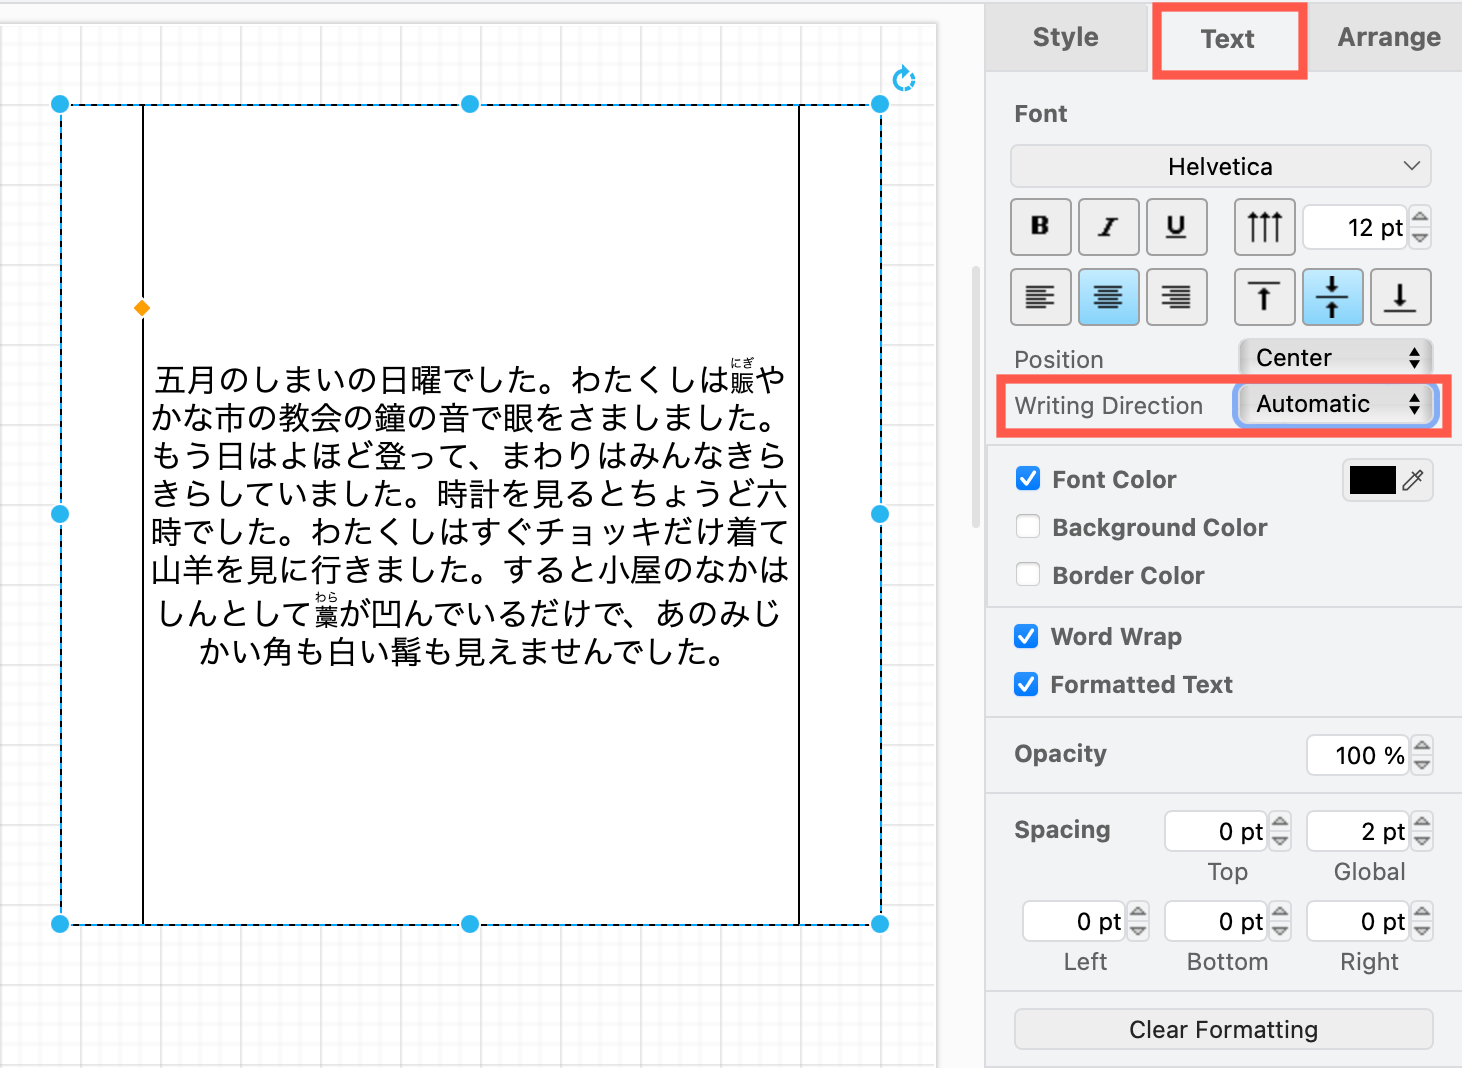 Change the orientation of Chinese, Korean and Japanese text to be vertical, and read right to left